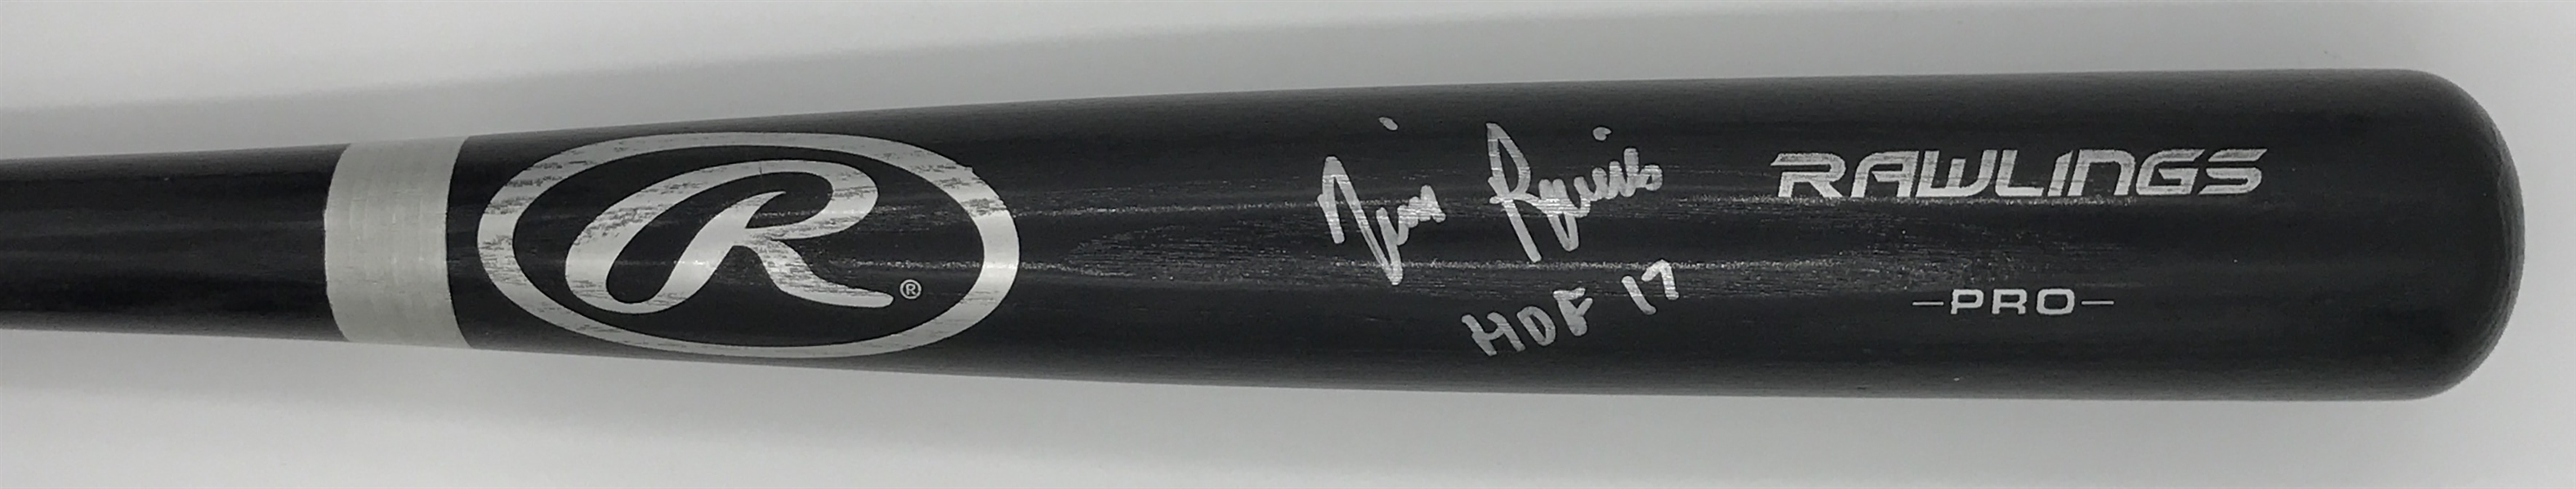 Tim Raines "HOF 17" inscripted Autographed Rawlings Bat MLB Authenticated